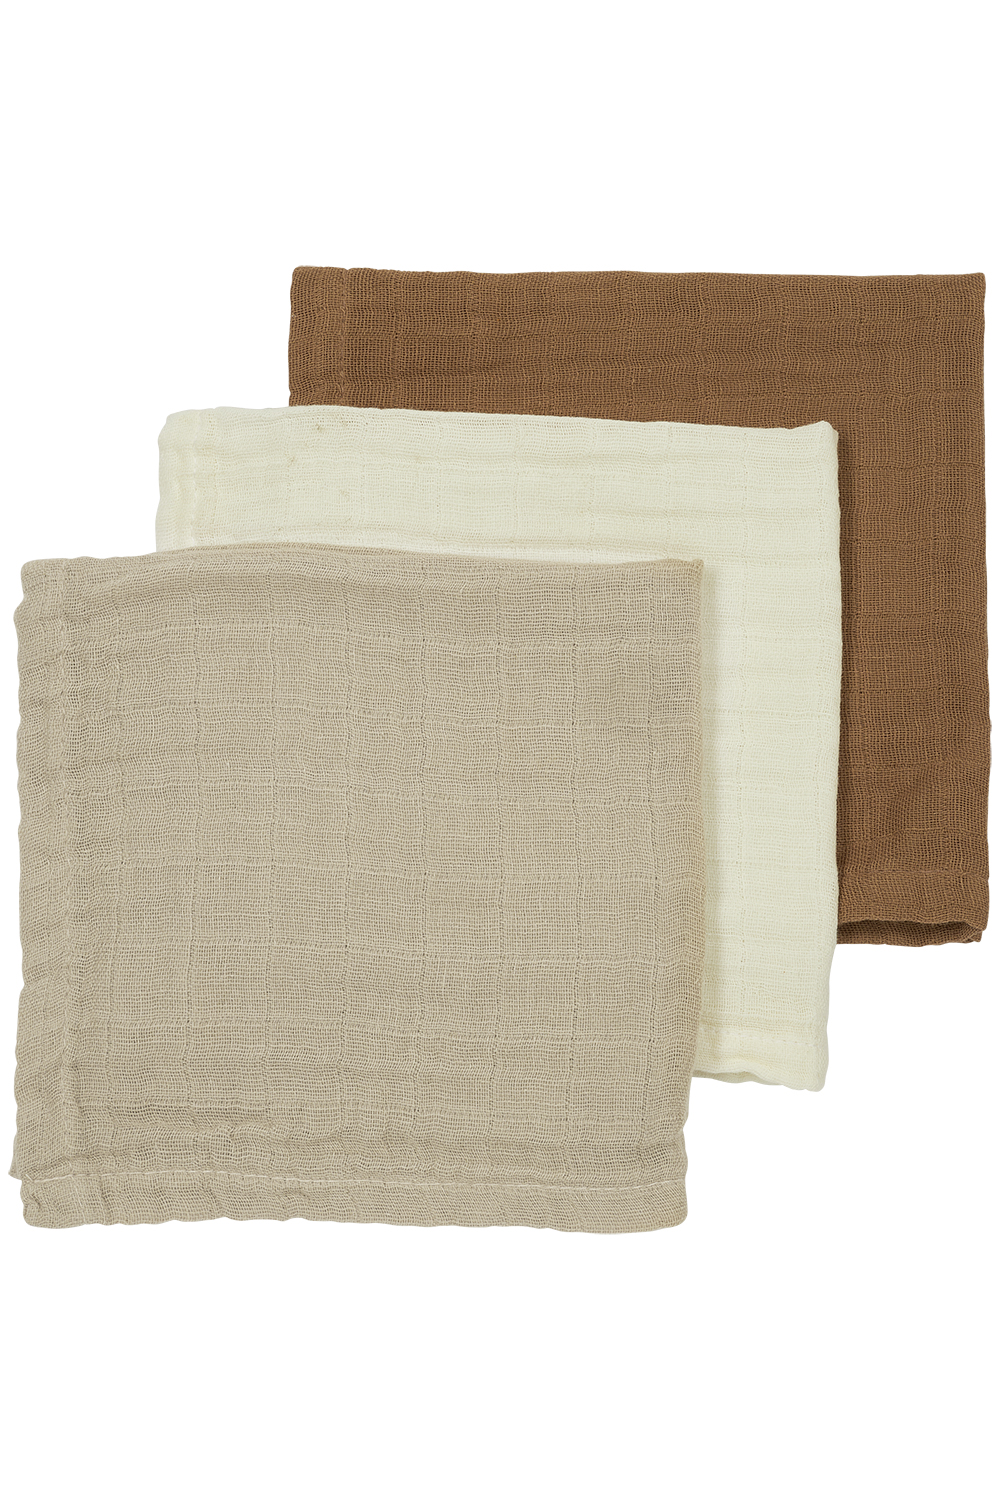 Facecloth 3-pack pre-washed muslin Uni - offwhite/sand/toffee - 30x30cm